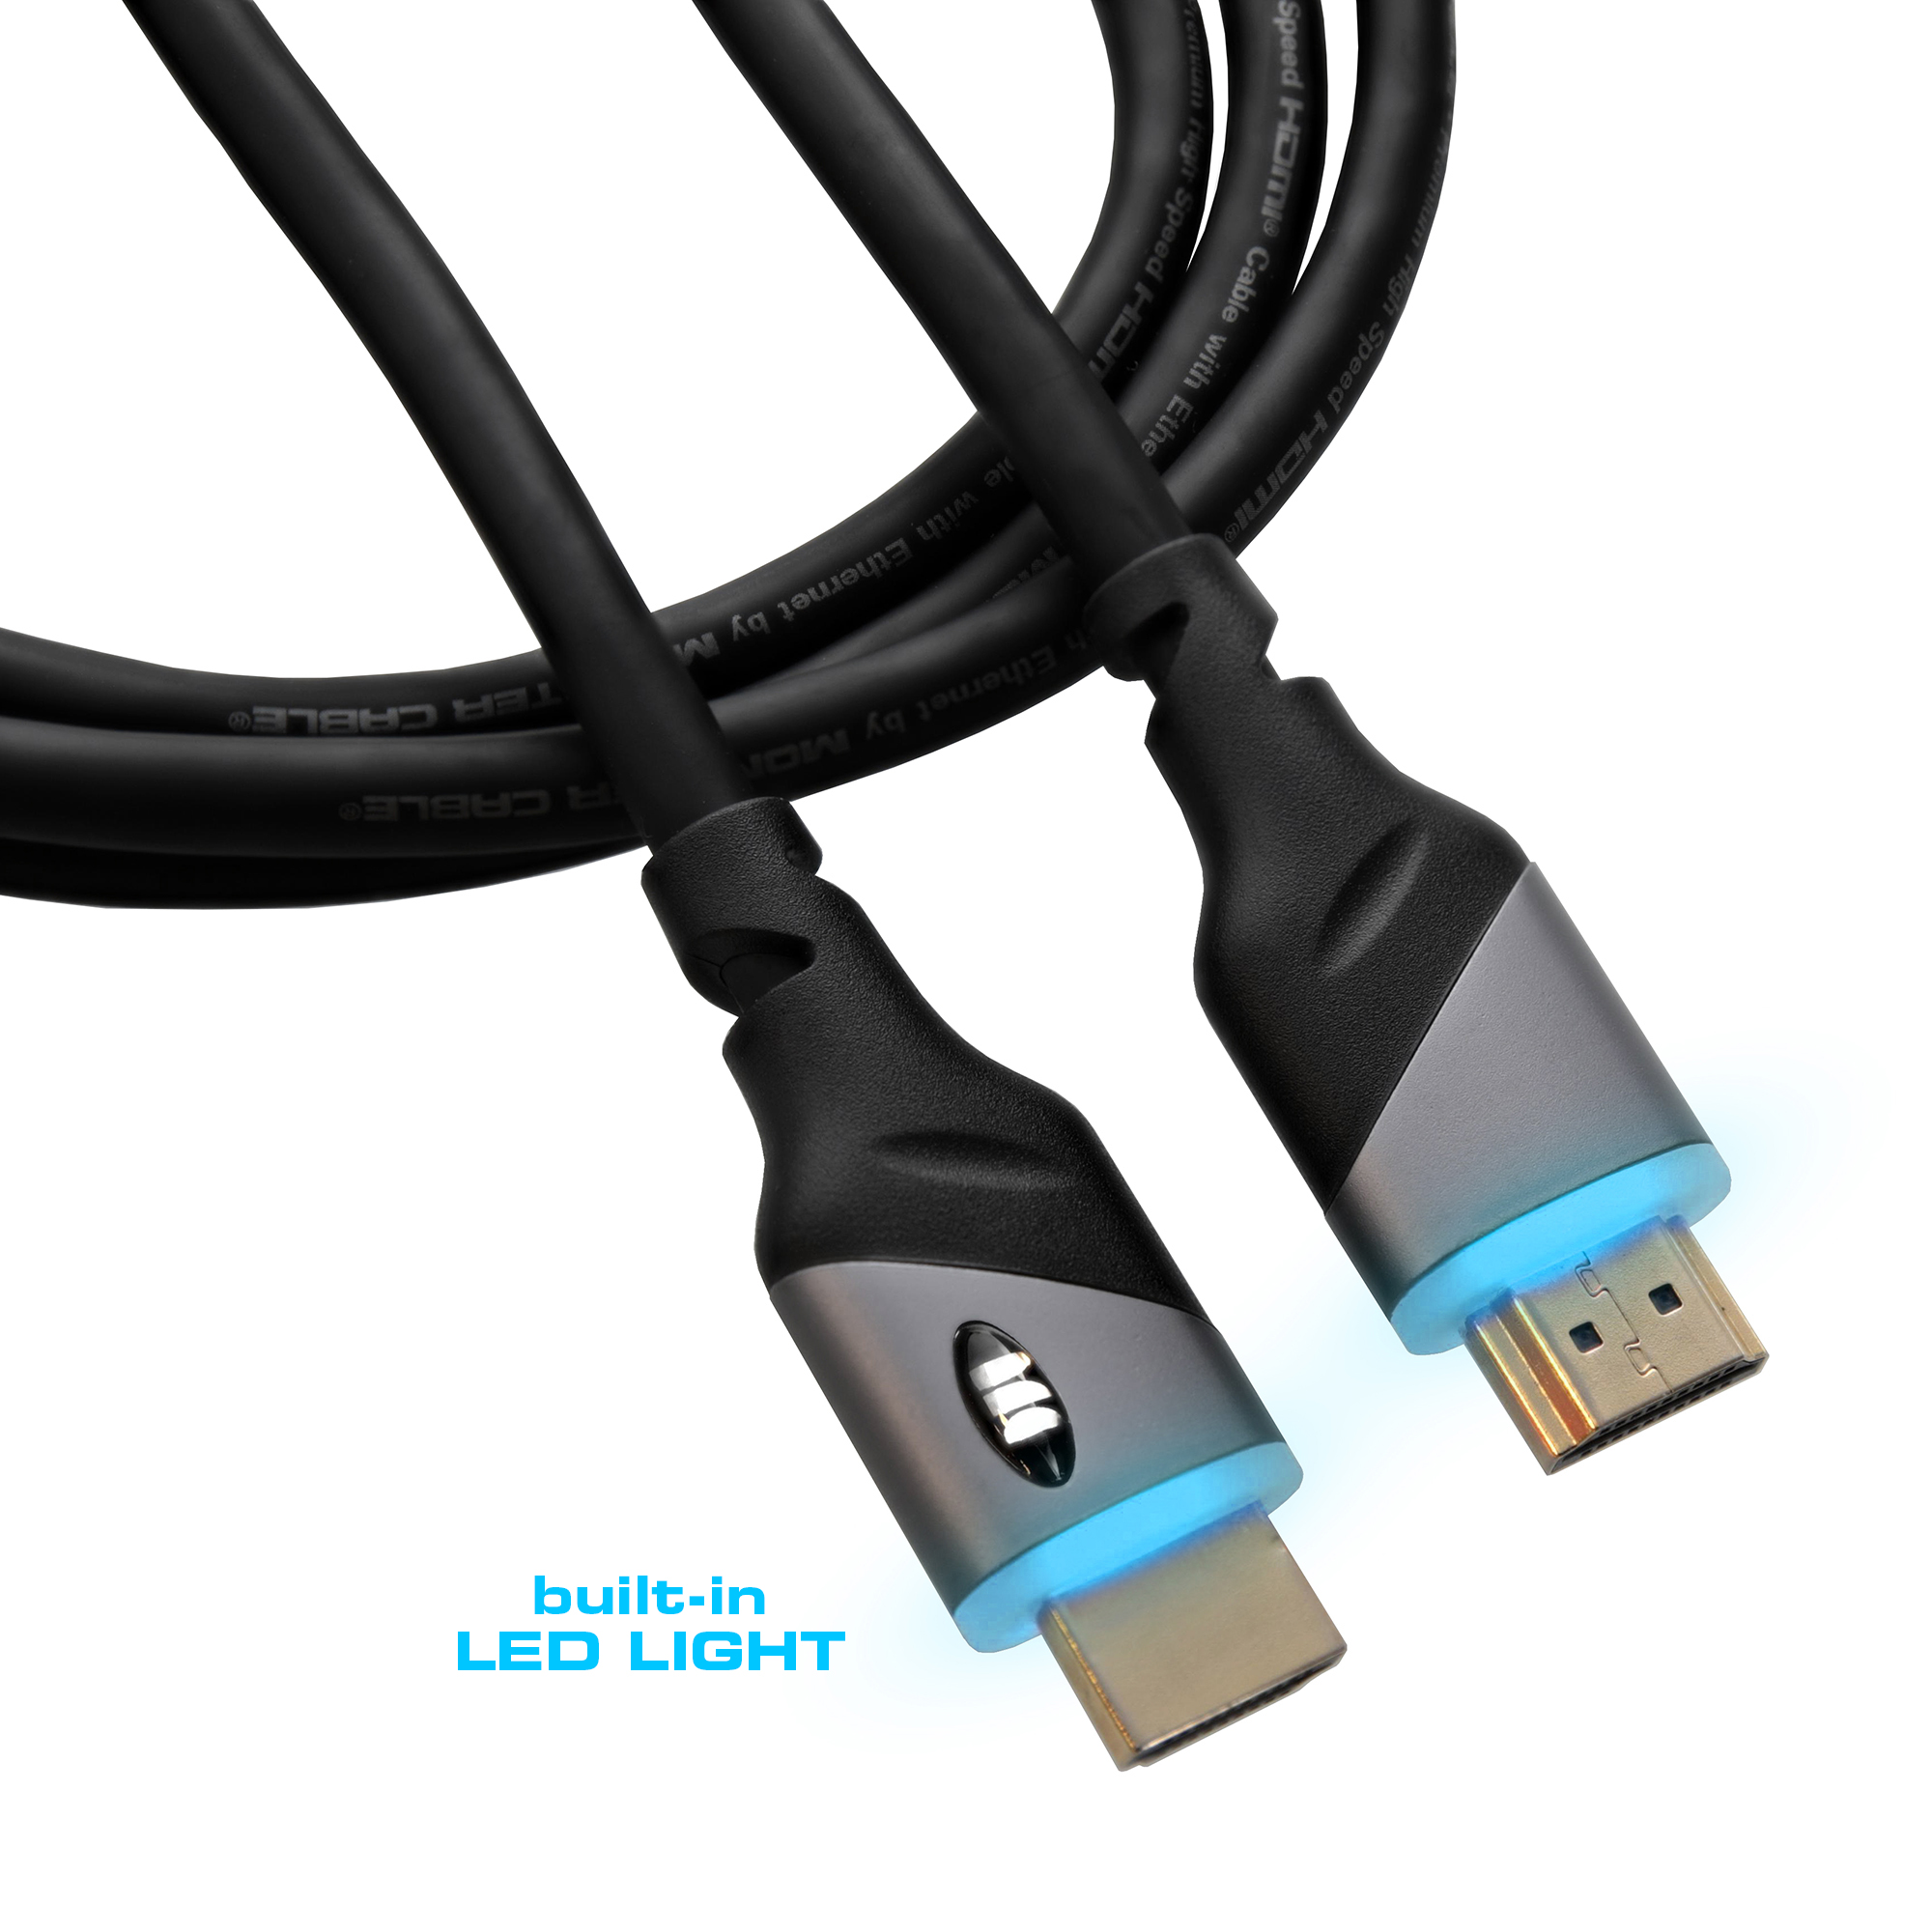 Built-in Blue LED Light 6 ft High Speed 4K HDR HDMI Cable, Great Gaming, Video, and - Monster Illuminessence